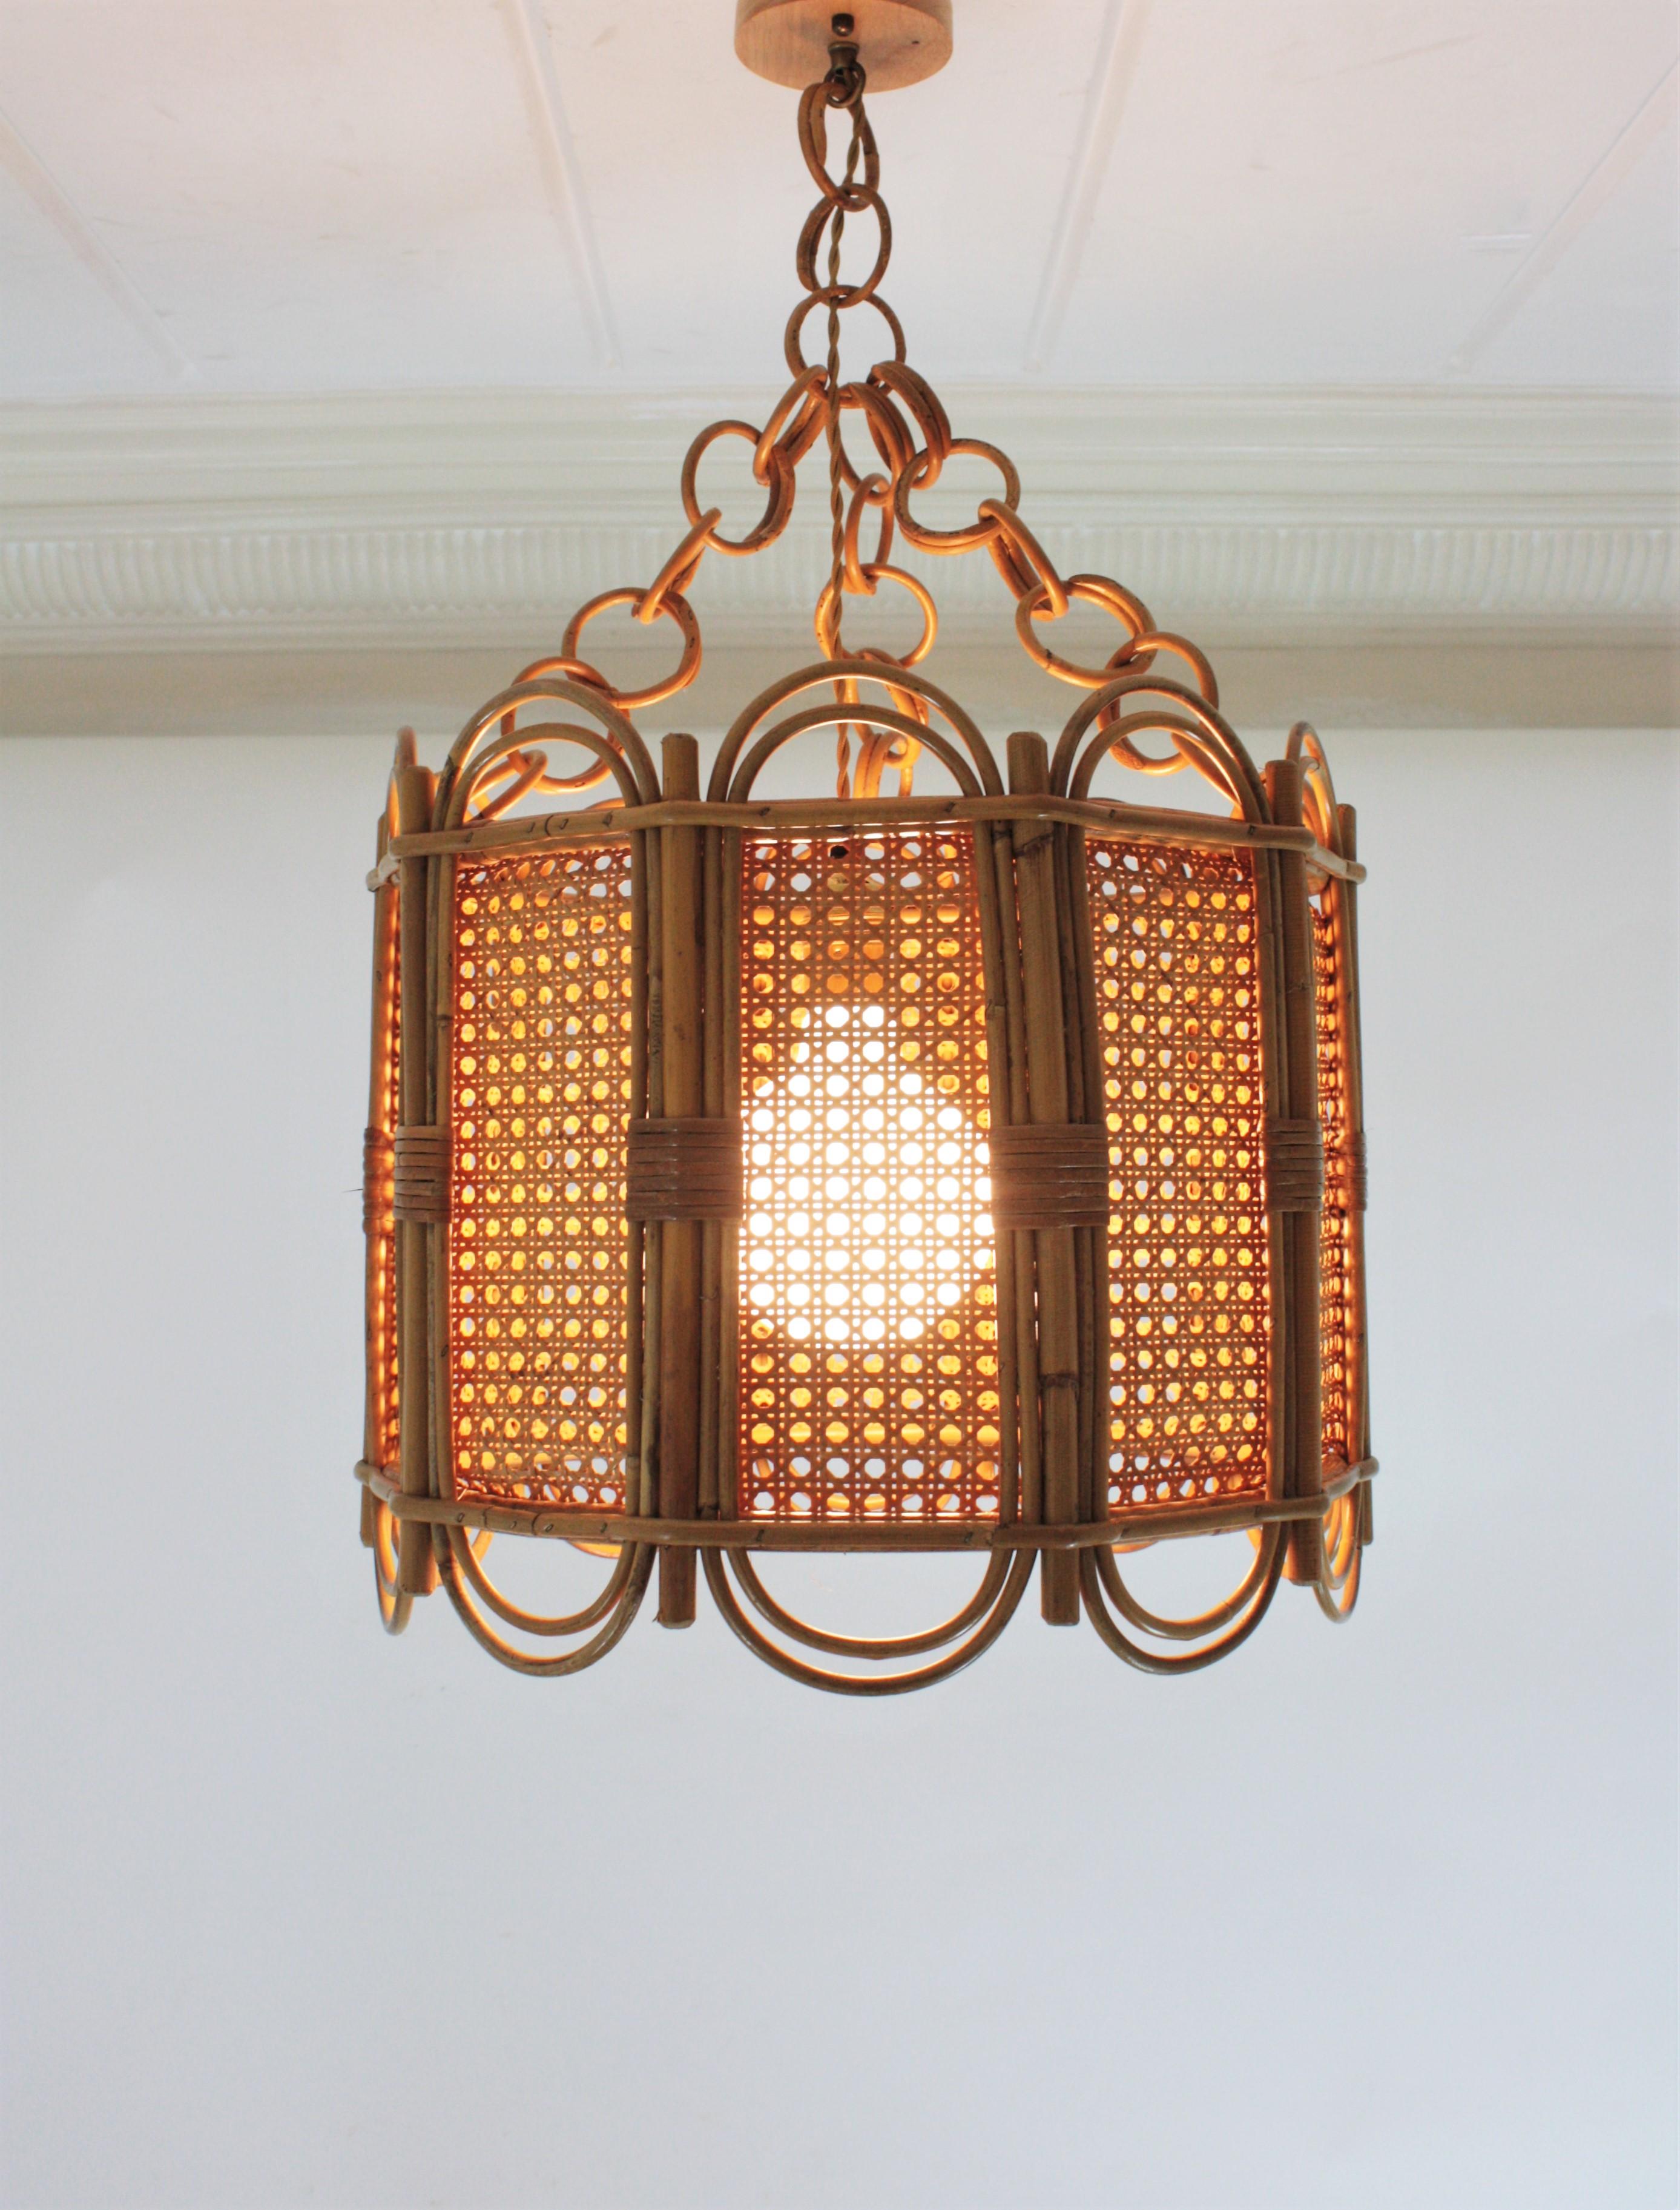 Hand-Crafted Rattan Wicker Weave Large Drum Pendant Light or Lantern, 1960s For Sale